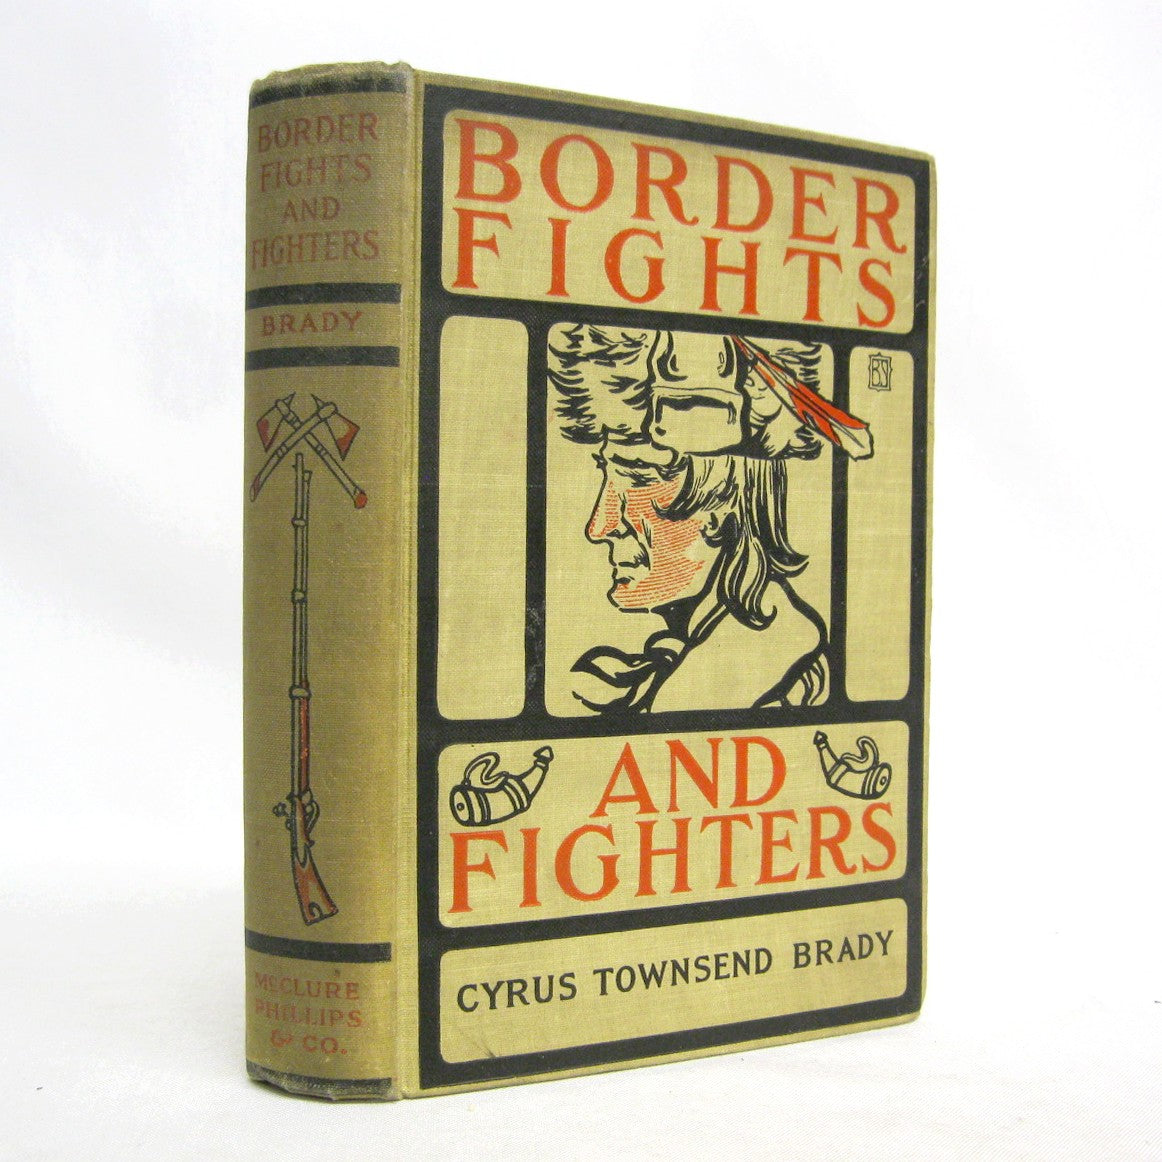 Border Fights and Fighters by Cyrus Townsend Brady